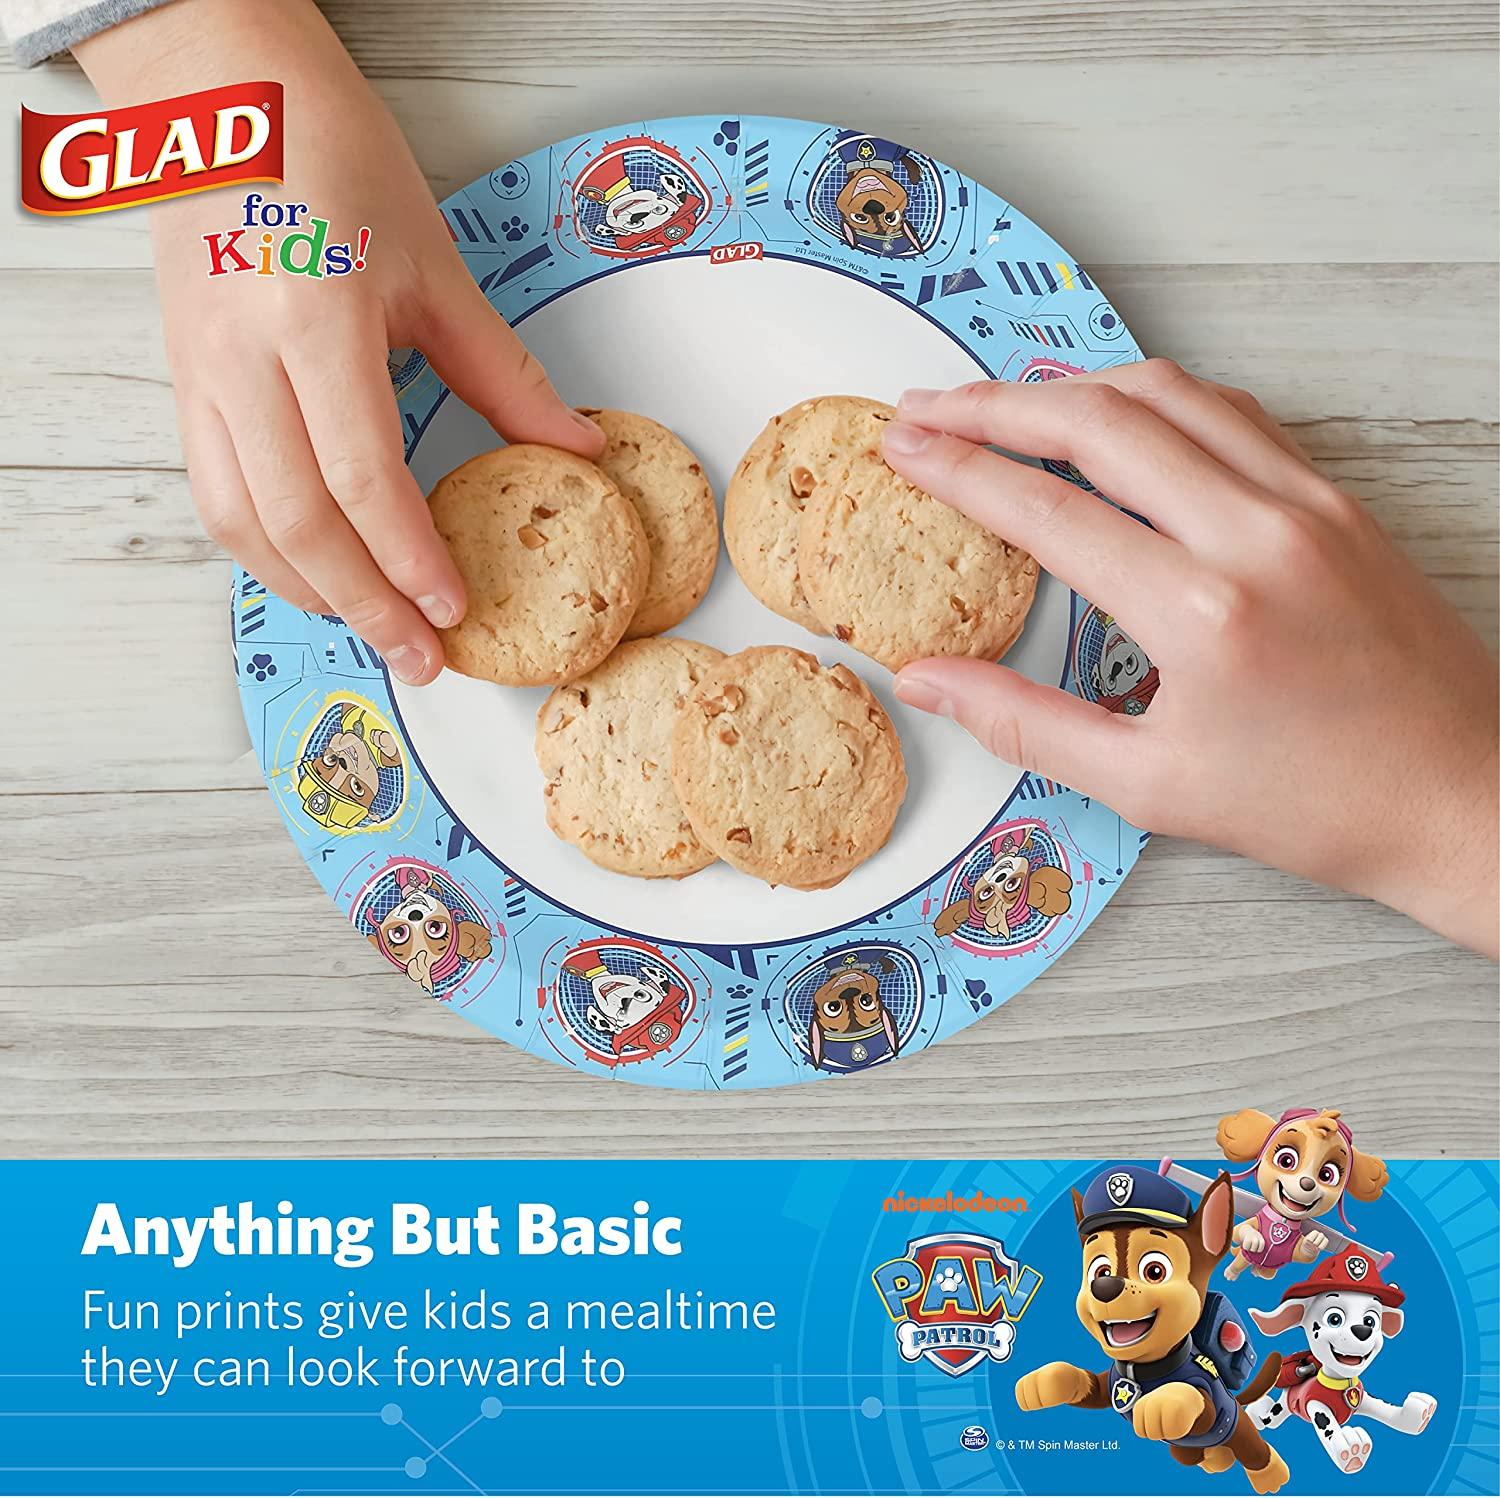 Glad for Kids 7-Inch Paper Plates | Small Blue Round Paper Plates with Paw Patrol Design | 20 ct Heavy Duty Disposable Soak Proof Microwavable Paper